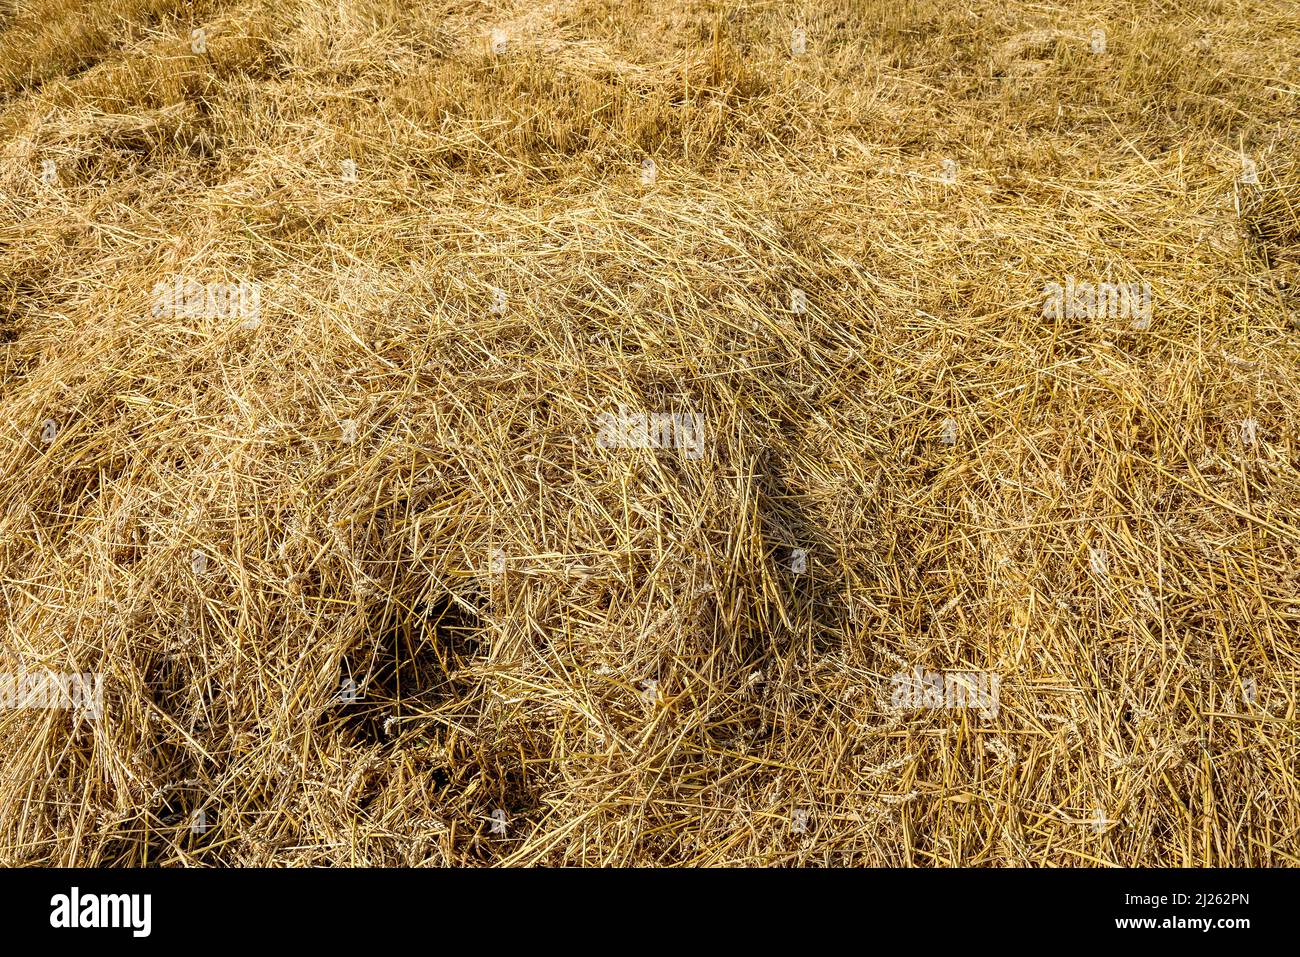 Golden straw on field with machine trace on ground Stock Photo